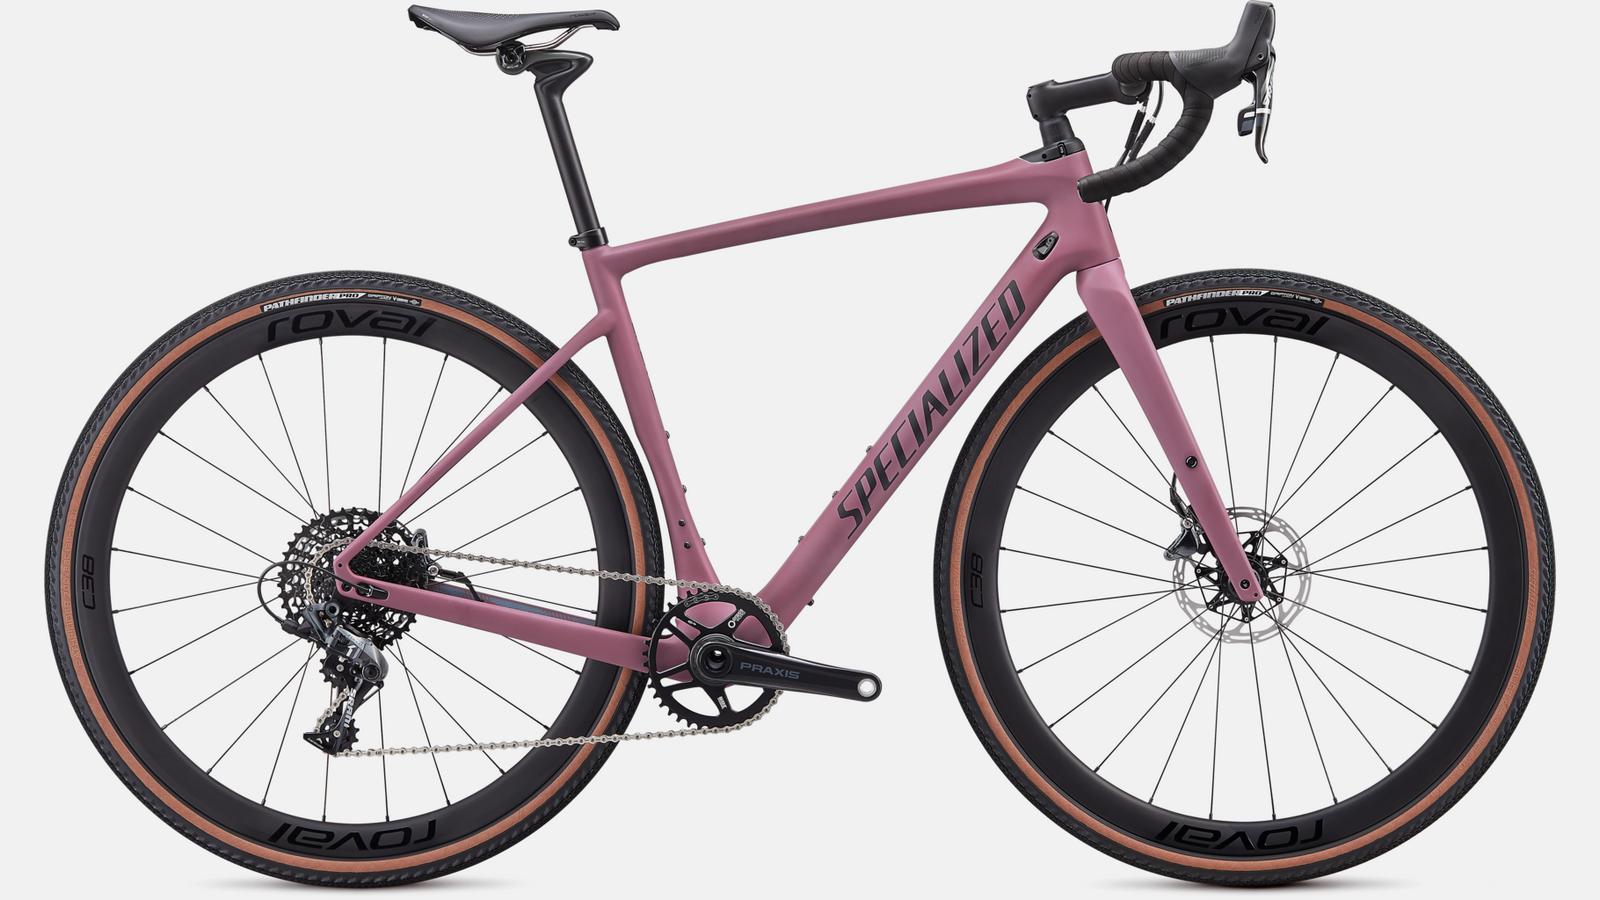 Paint for 2020 Specialized Diverge Expert - Satin Dusty Lilac